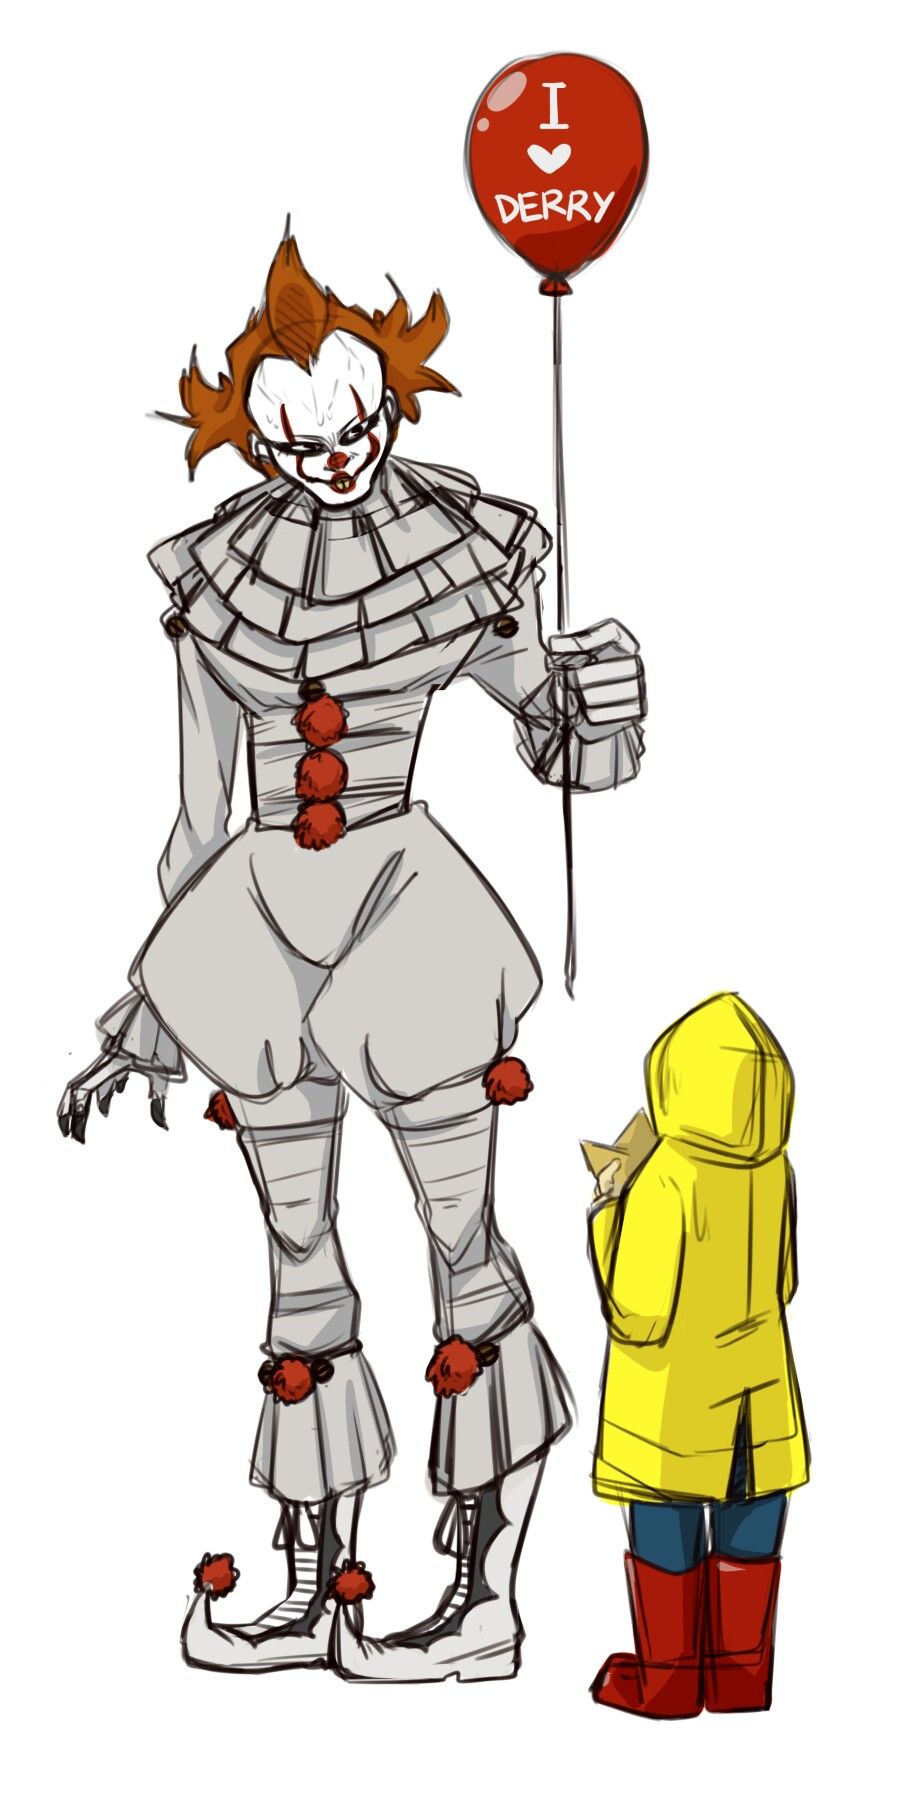 Pennywise and georgie.